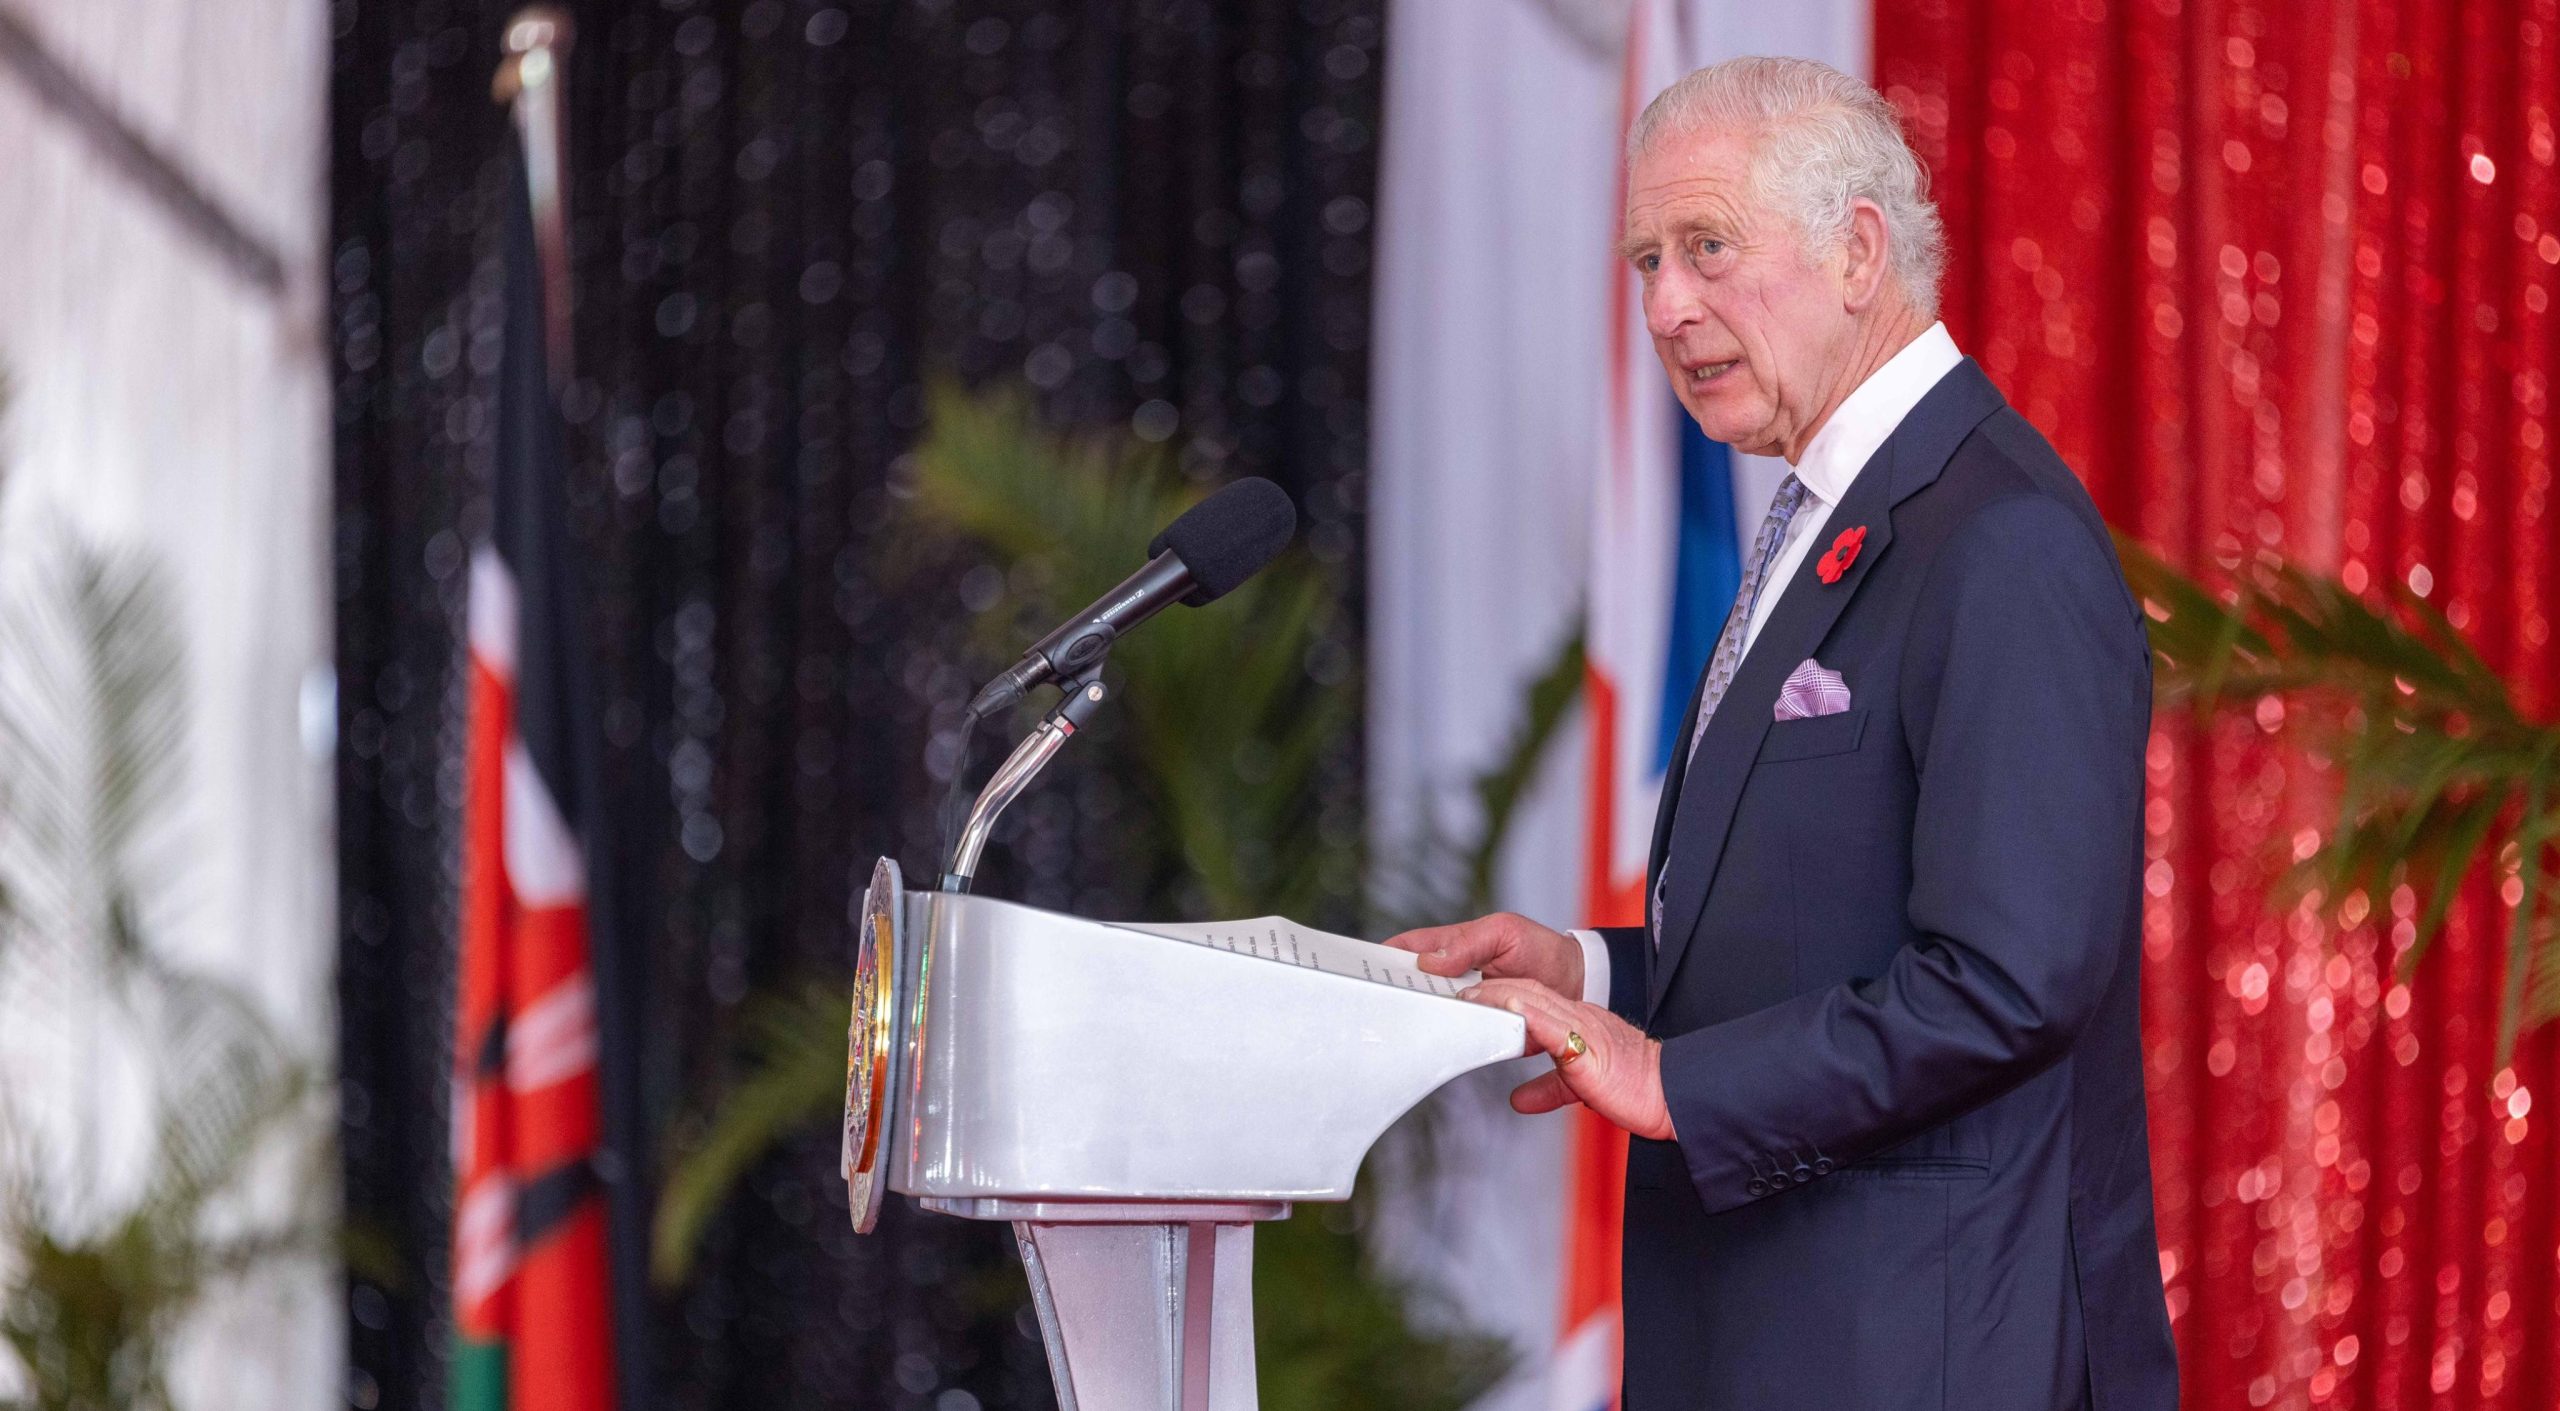 Kenya to Elevate UK Relations to Boost Trade